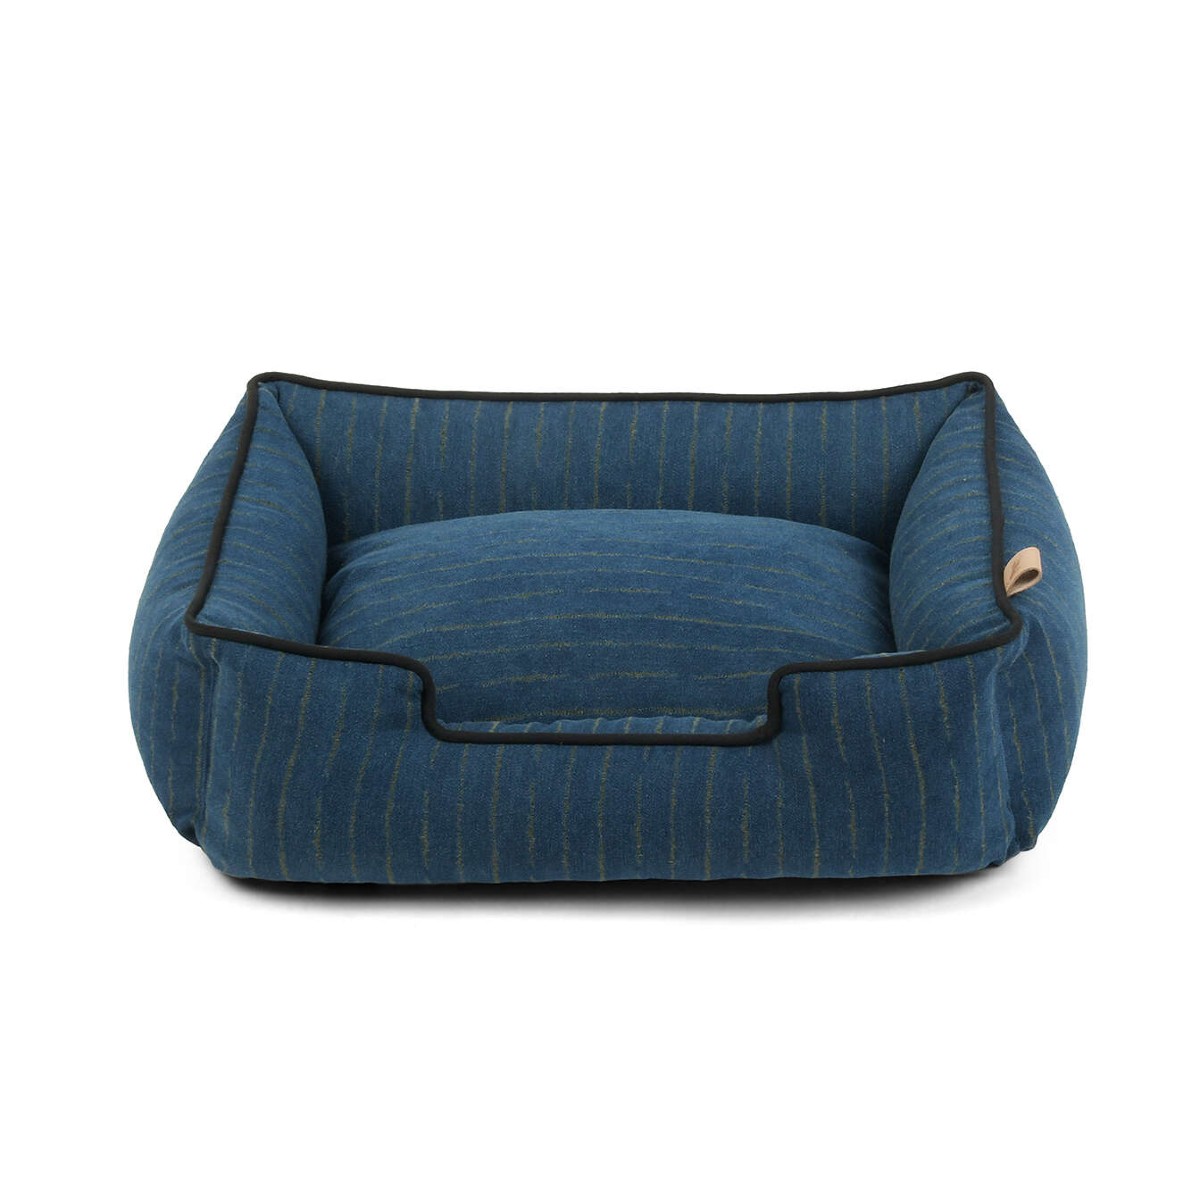 P.L.A.Y. Manhattan Lounge Dog Bed - The Chelsea